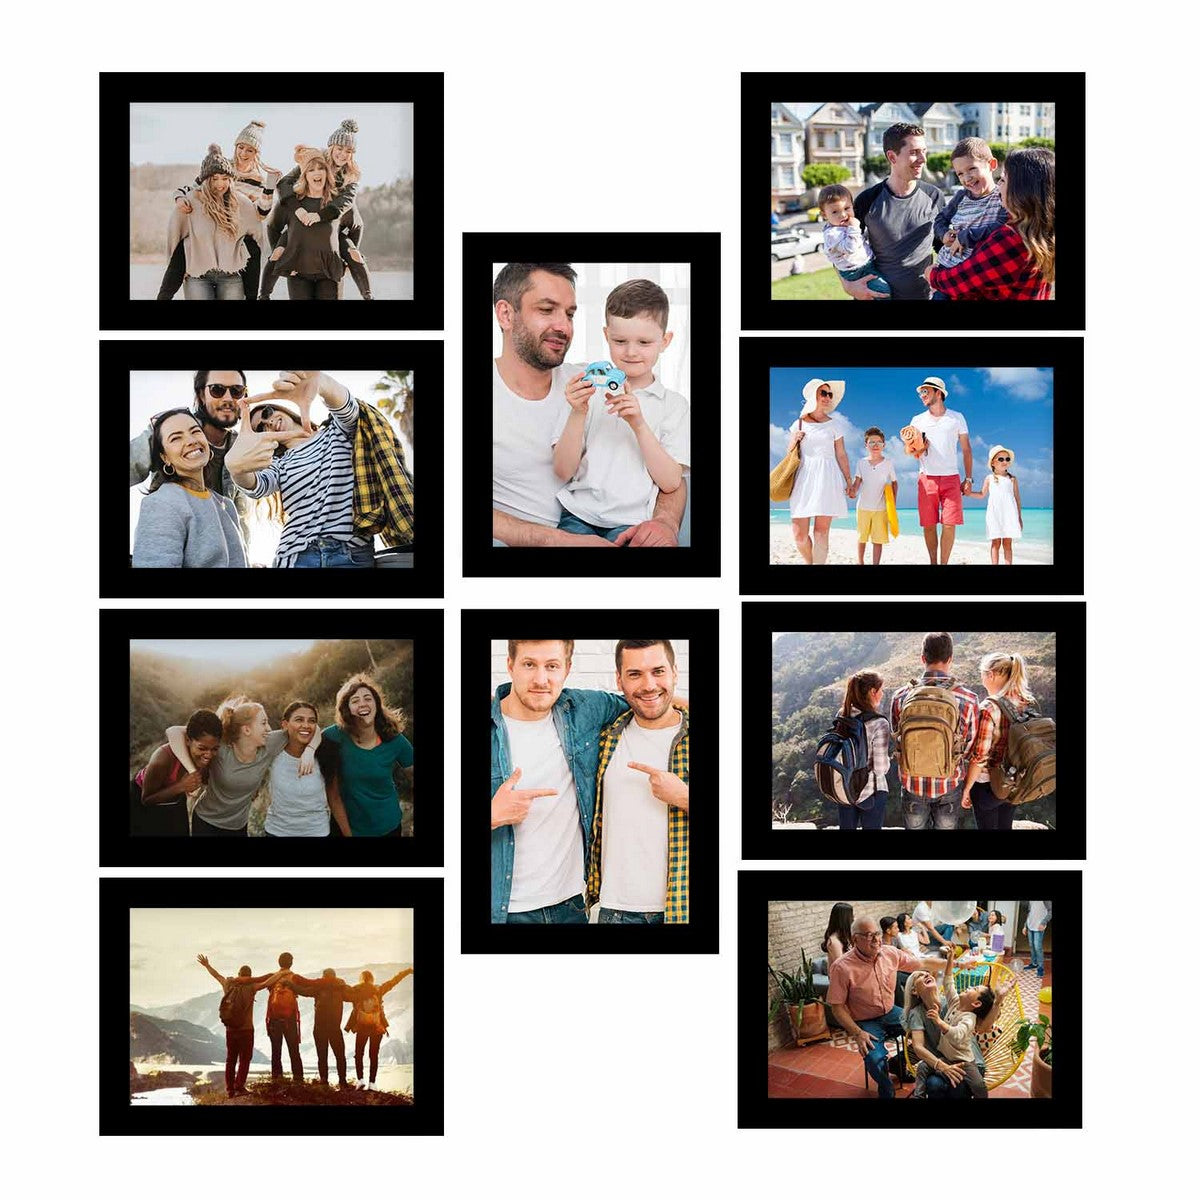 Memory Wall Collage Photo Frame - Set of 10 Photo Frames for 10 Photos of 6"x8"